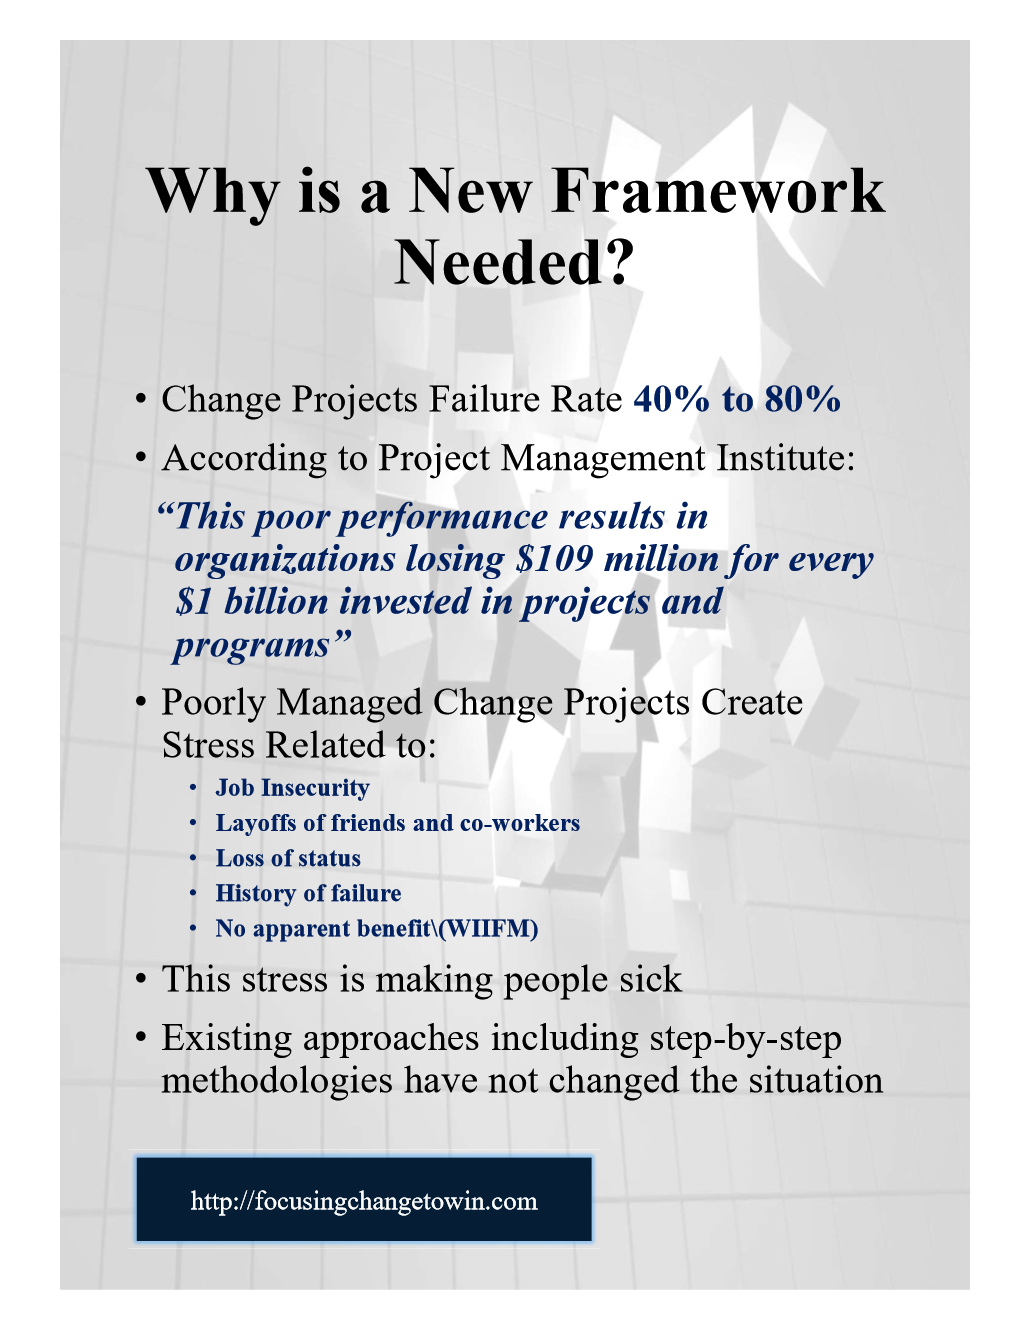 Why is a New Framework Needed.Page 2 of 6